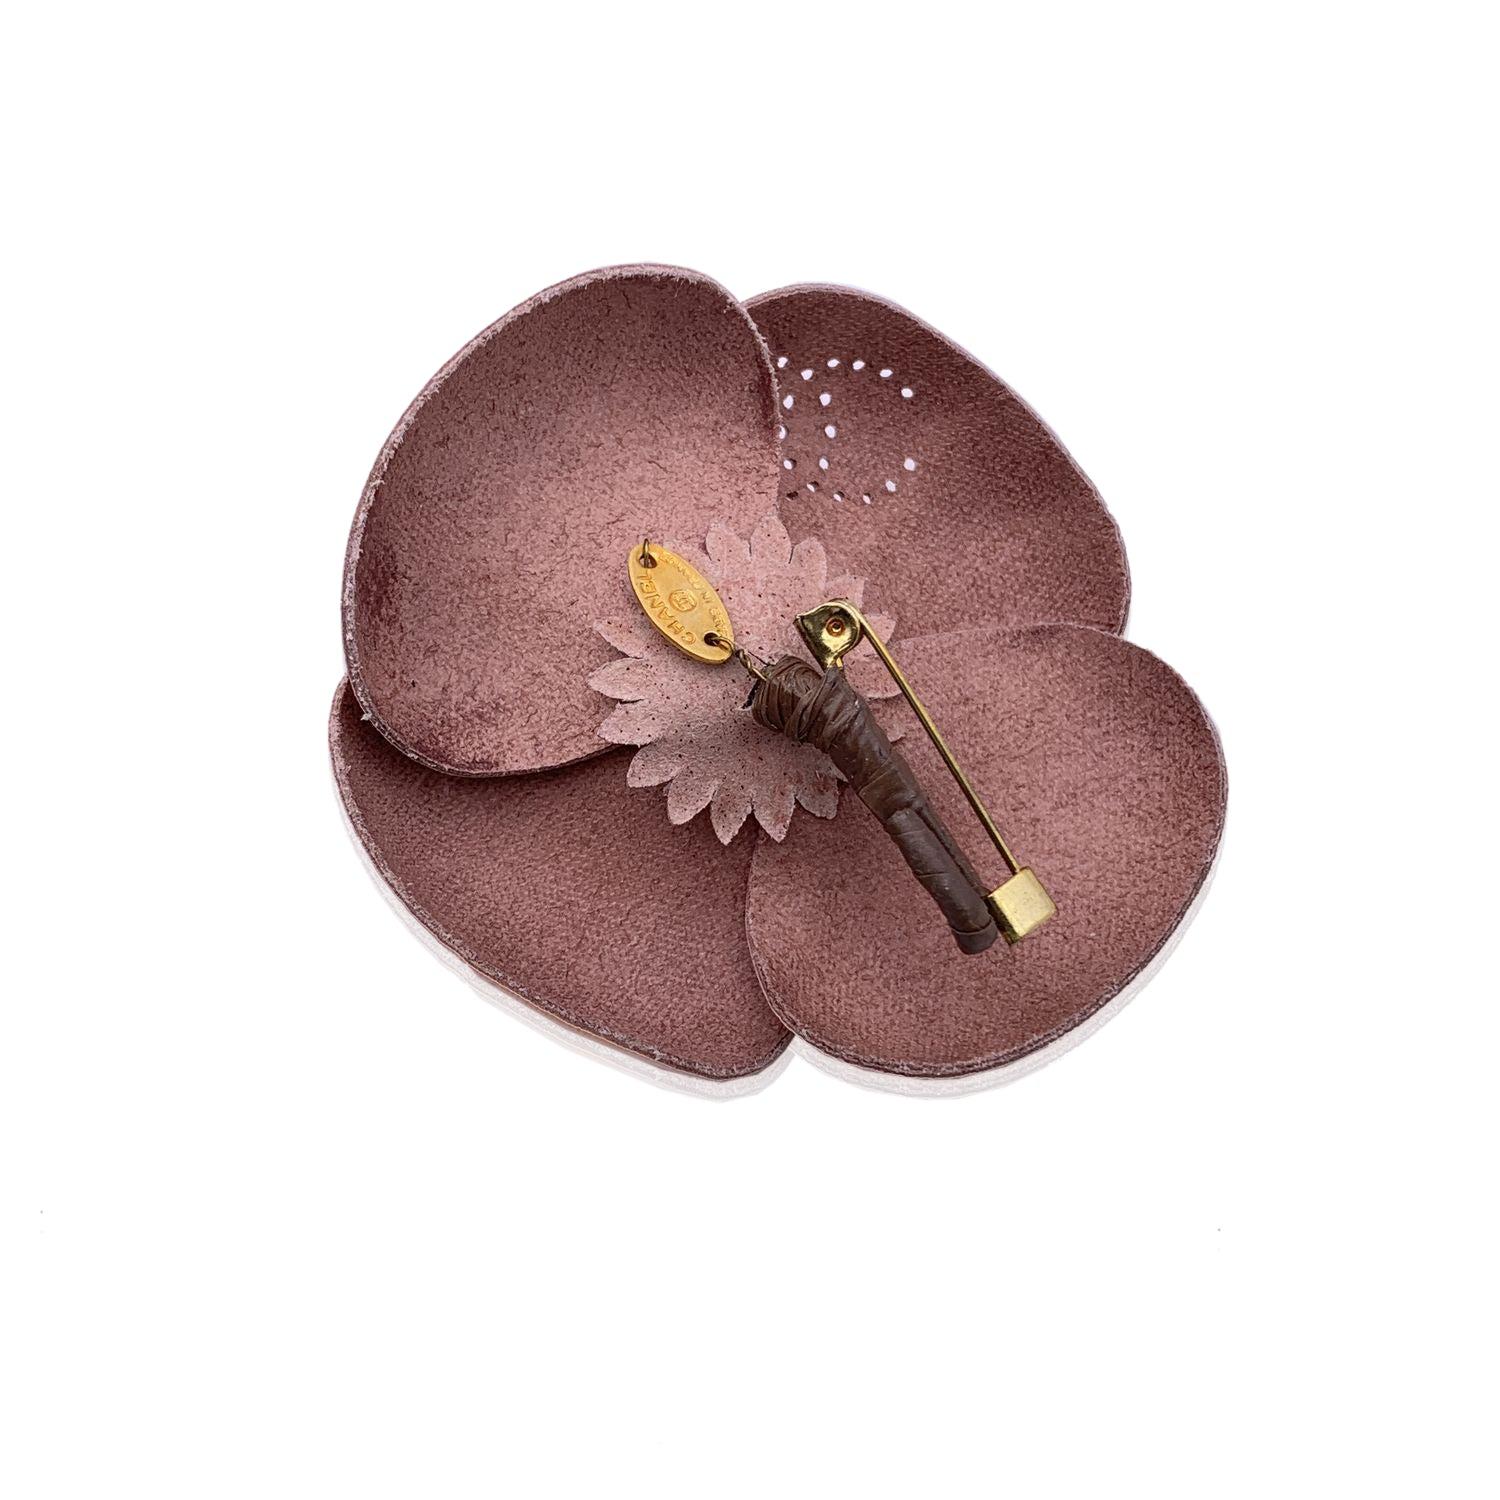 Chanel Vintage Tan Patent Leather Camelia Camellia Flower Brooch In Excellent Condition For Sale In Rome, Rome